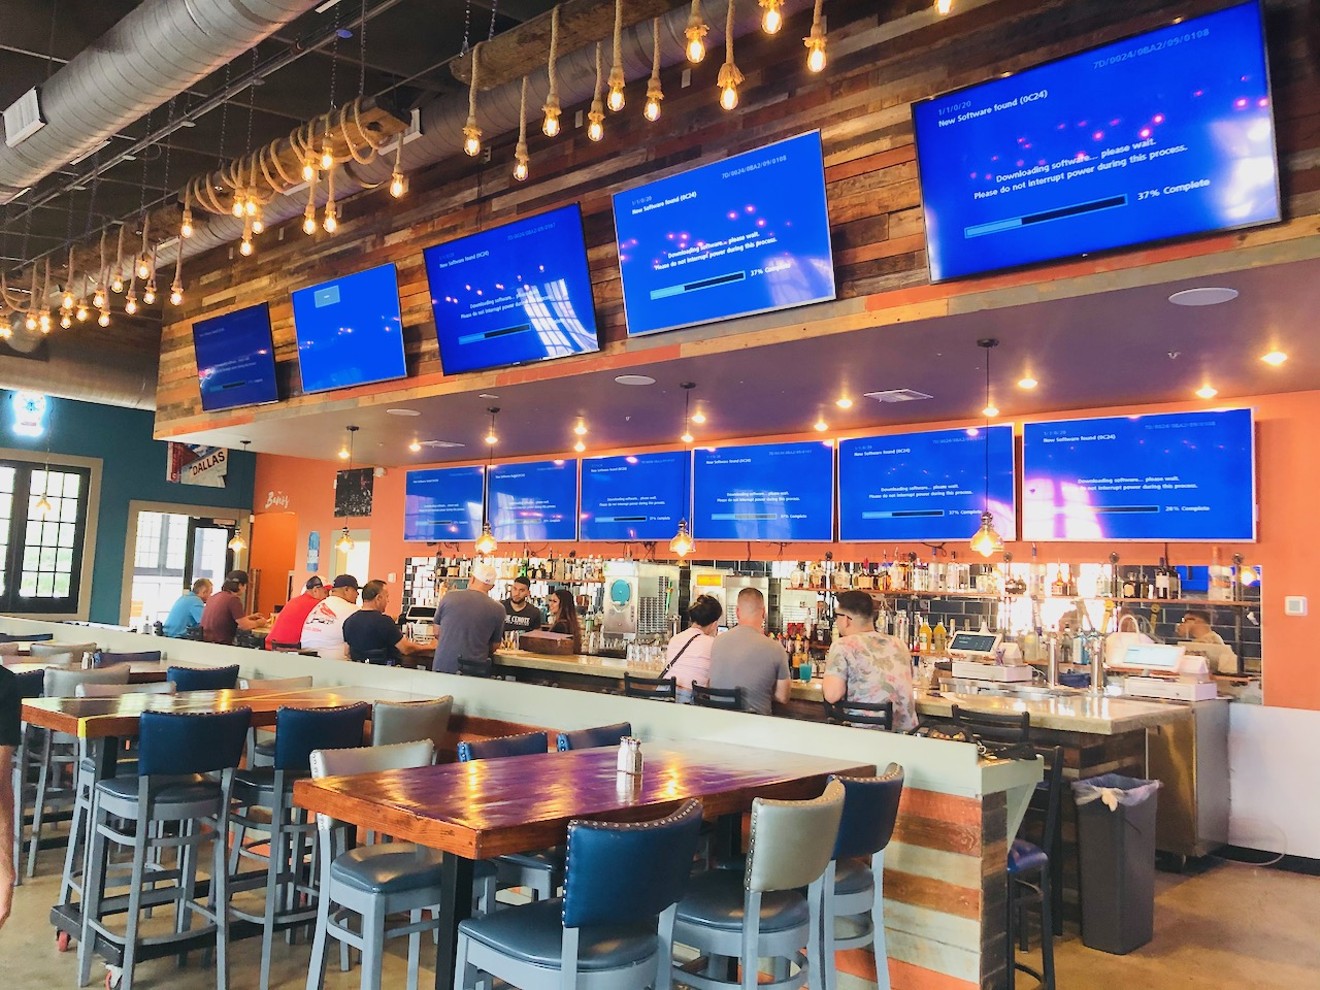 Inside the bar with TVs: squint your eyes and imagine the Rangers, Mavericks, Stars and Cowboys.